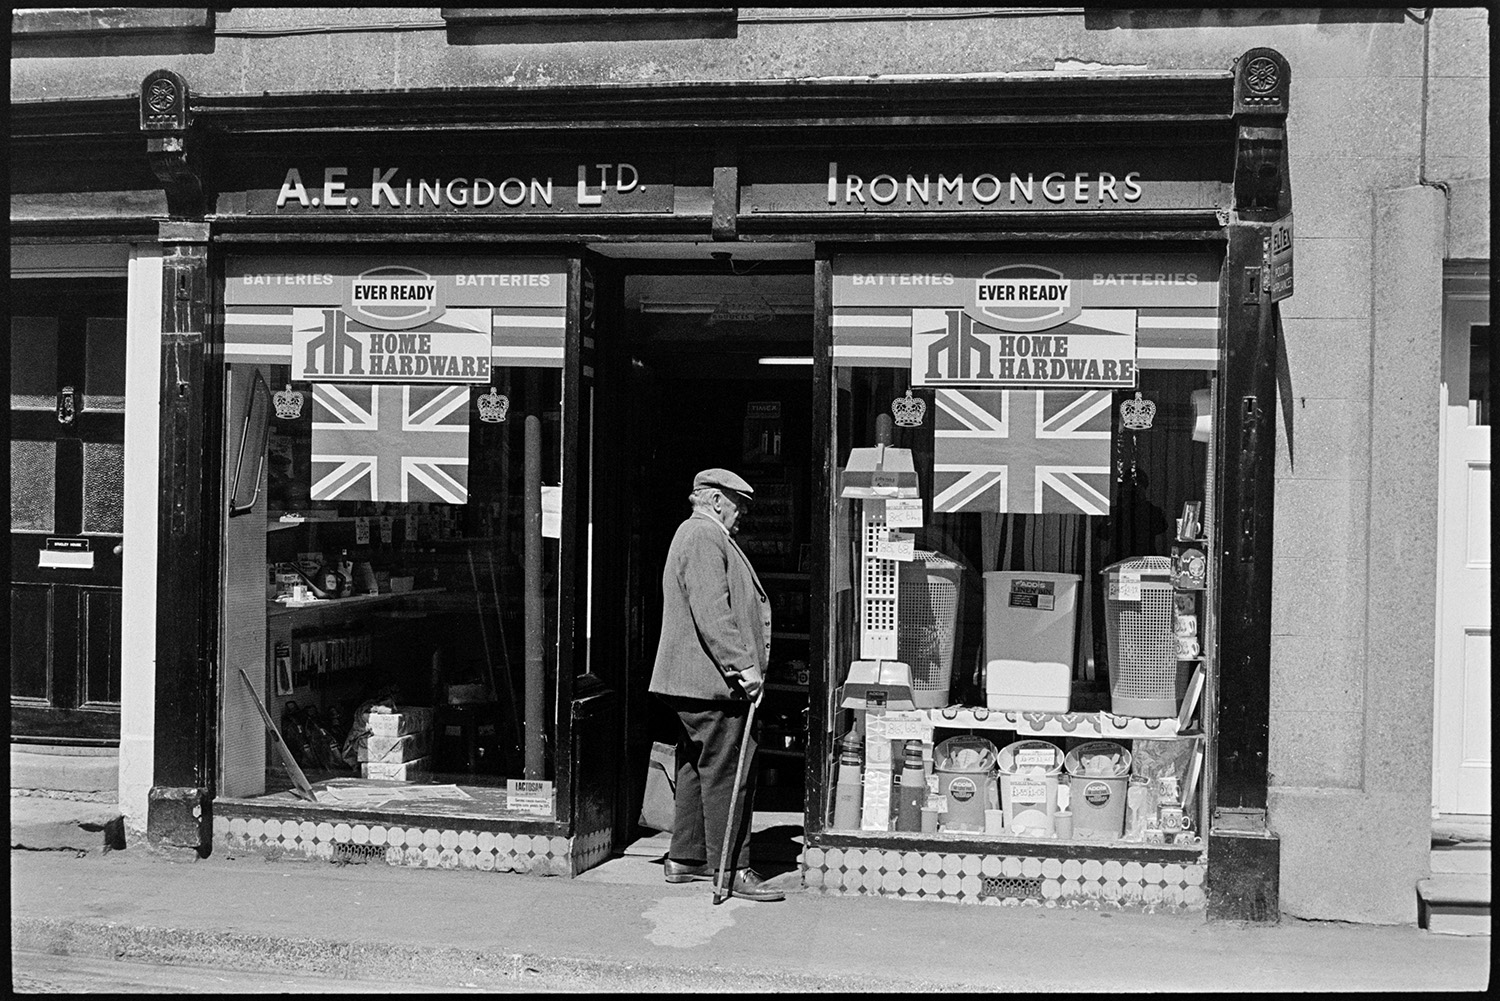 Ironmongers shop decorated for jubilee. 
[A man stood outside A E Kingdon, Ironmongers shop in Fore Street Chulmleigh. He is looking at the front window display which is decorated with Union Jack flags for Queen Elizabeth II Silver Jubilee.]